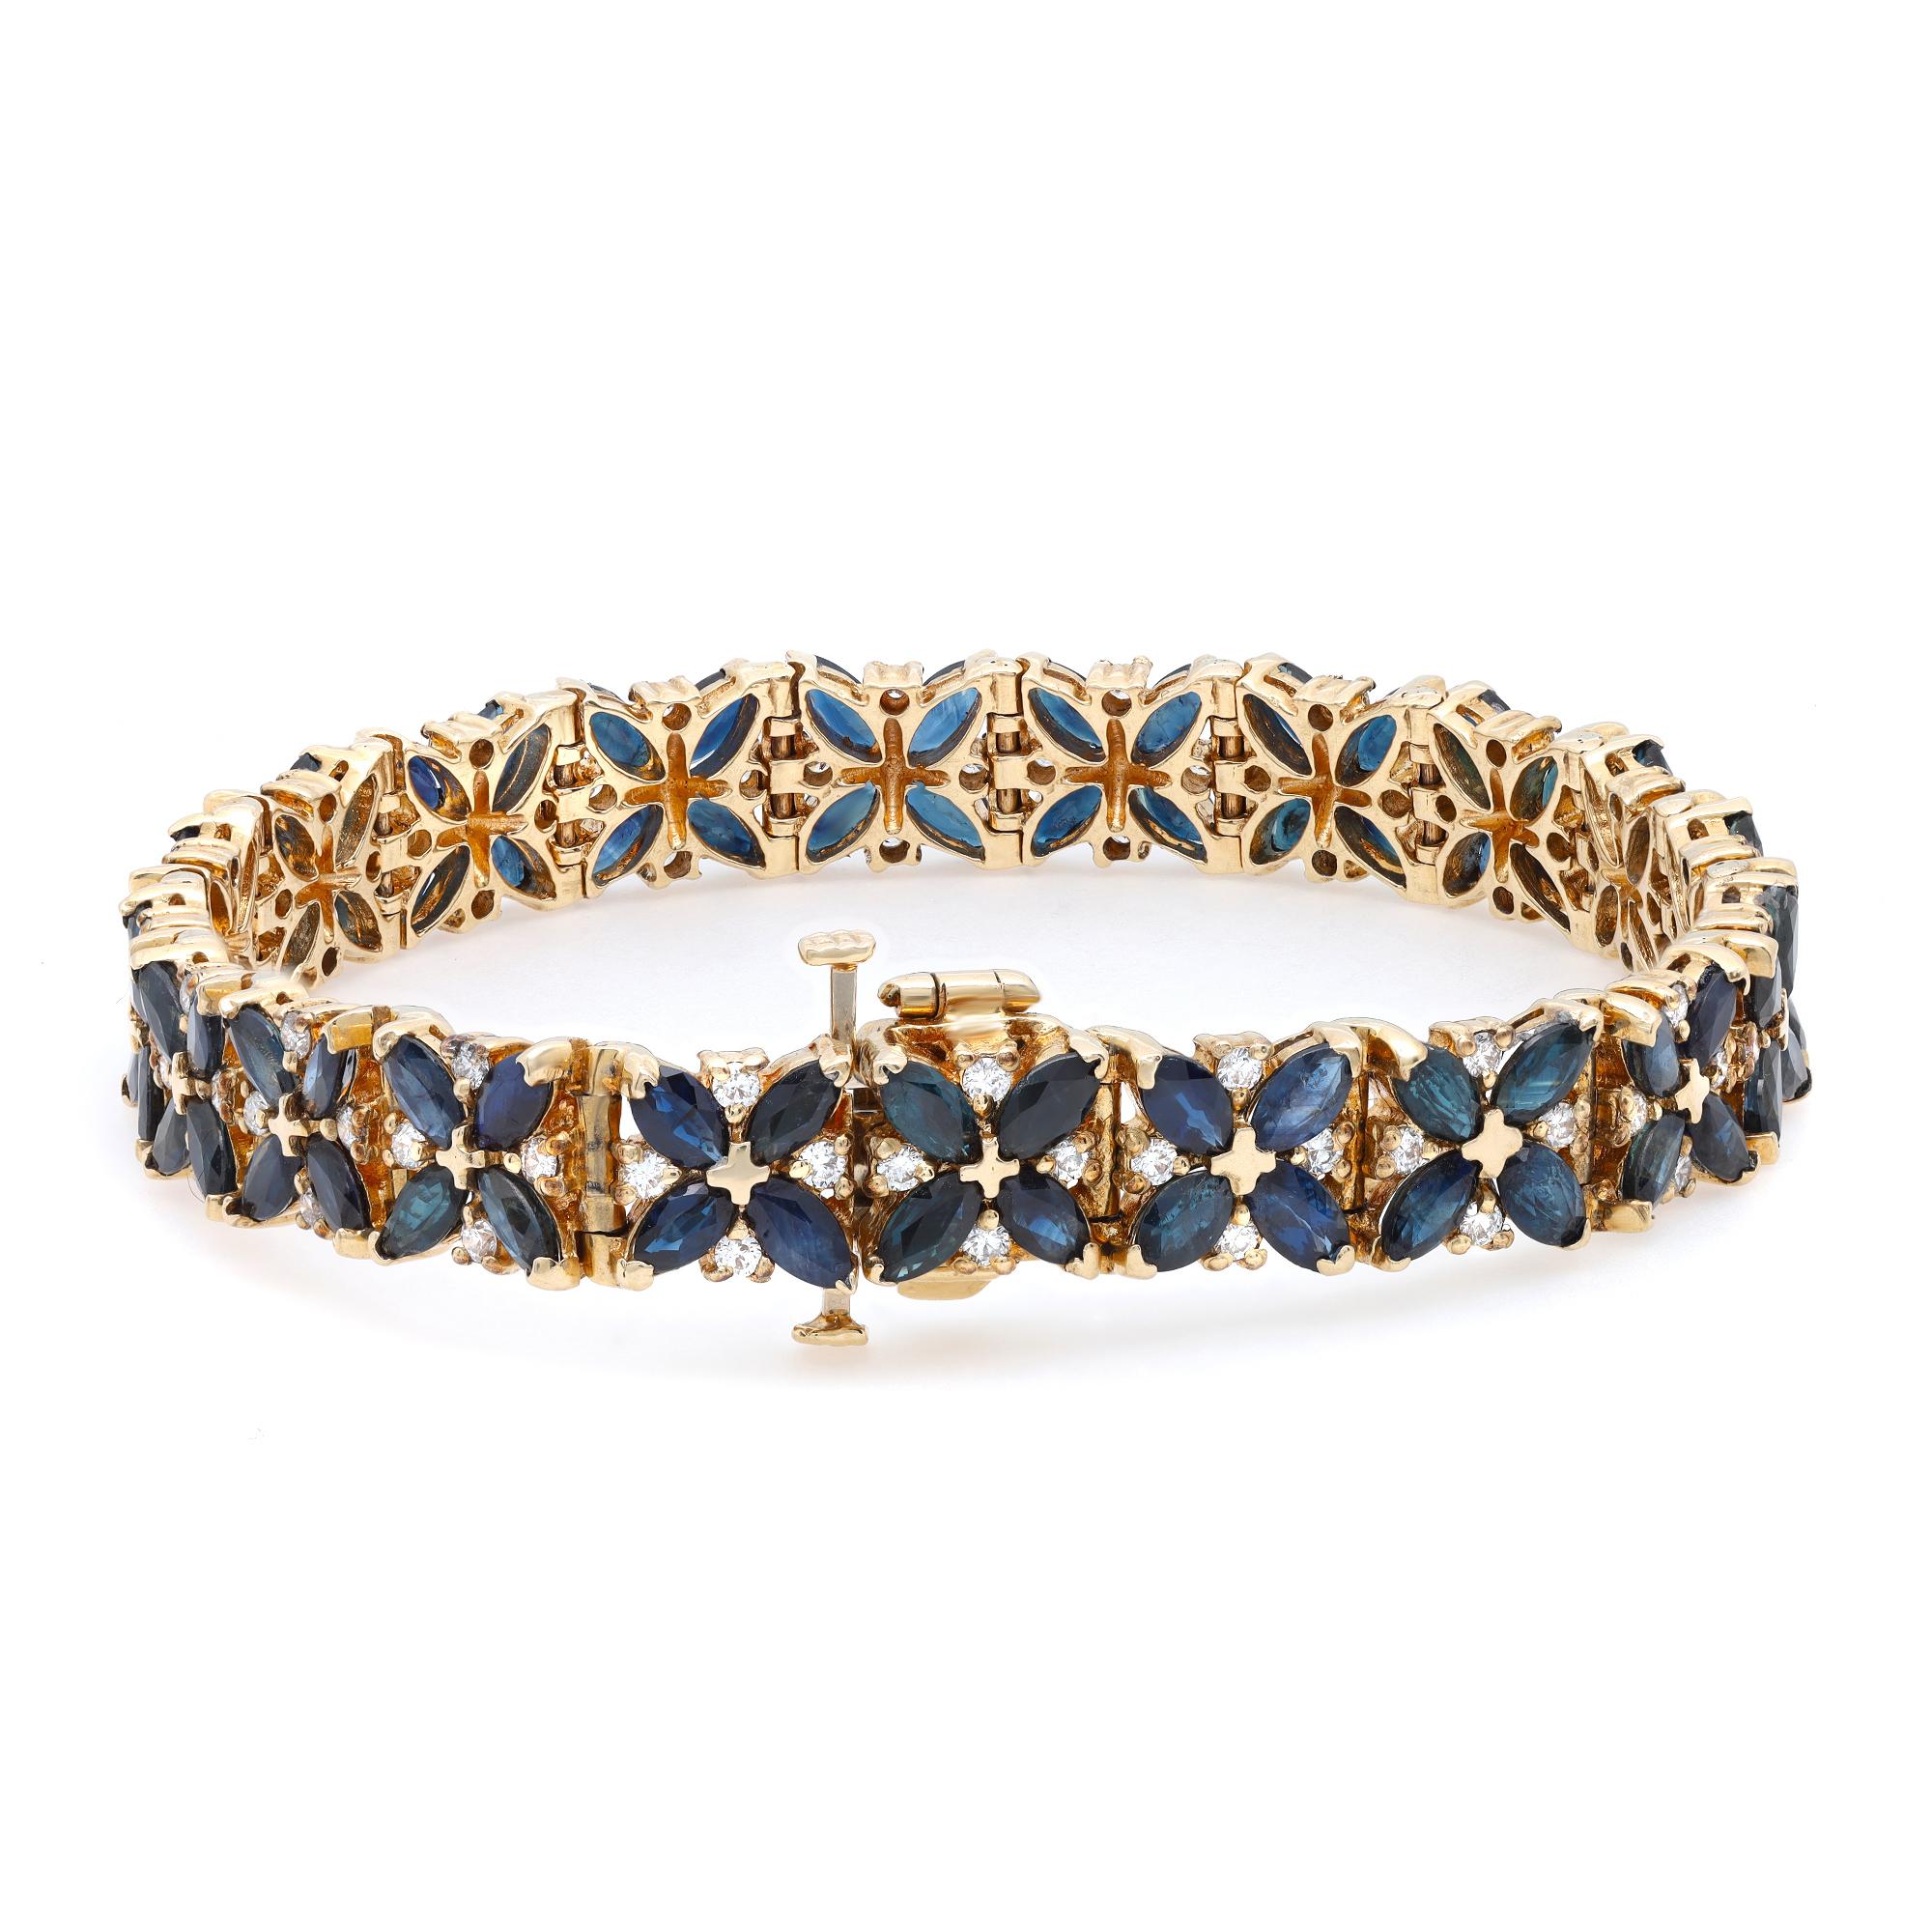 This beautifully crafted tennis bracelet features marquise cut blue Sapphires accented by round brilliant cut diamonds in prong setting. Crafted in 14k yellow gold. Total blue Sapphire weight: 8.00 carats. Total diamond weight: 1.00 carat. Length: 7